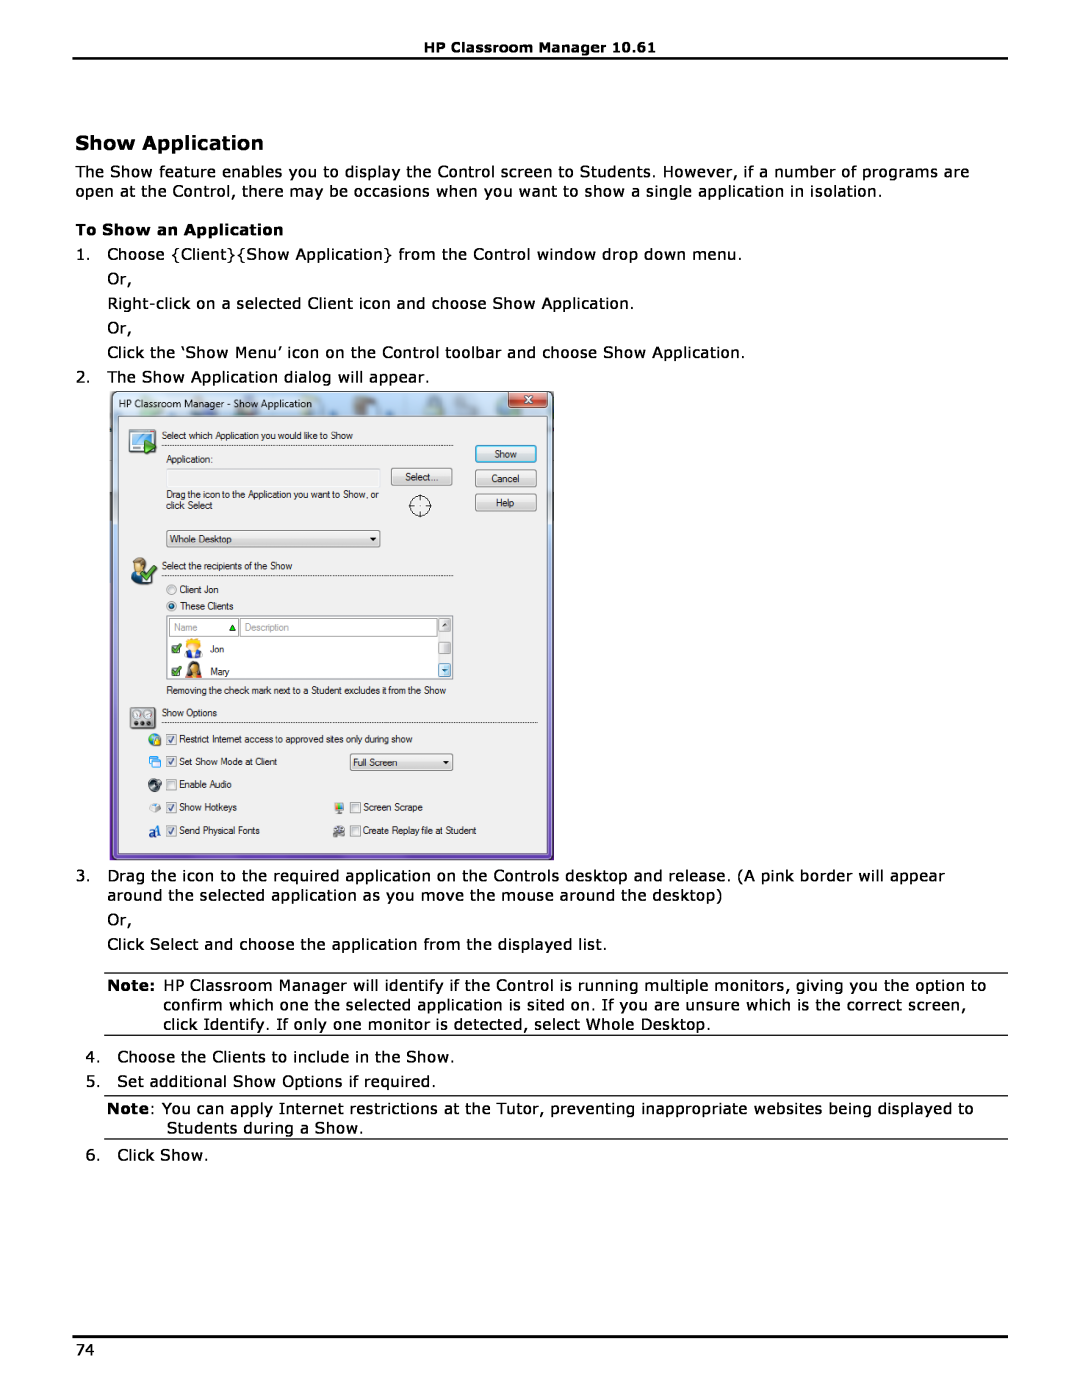 HP Classroom Manager manual Show Application, To Show an Application 